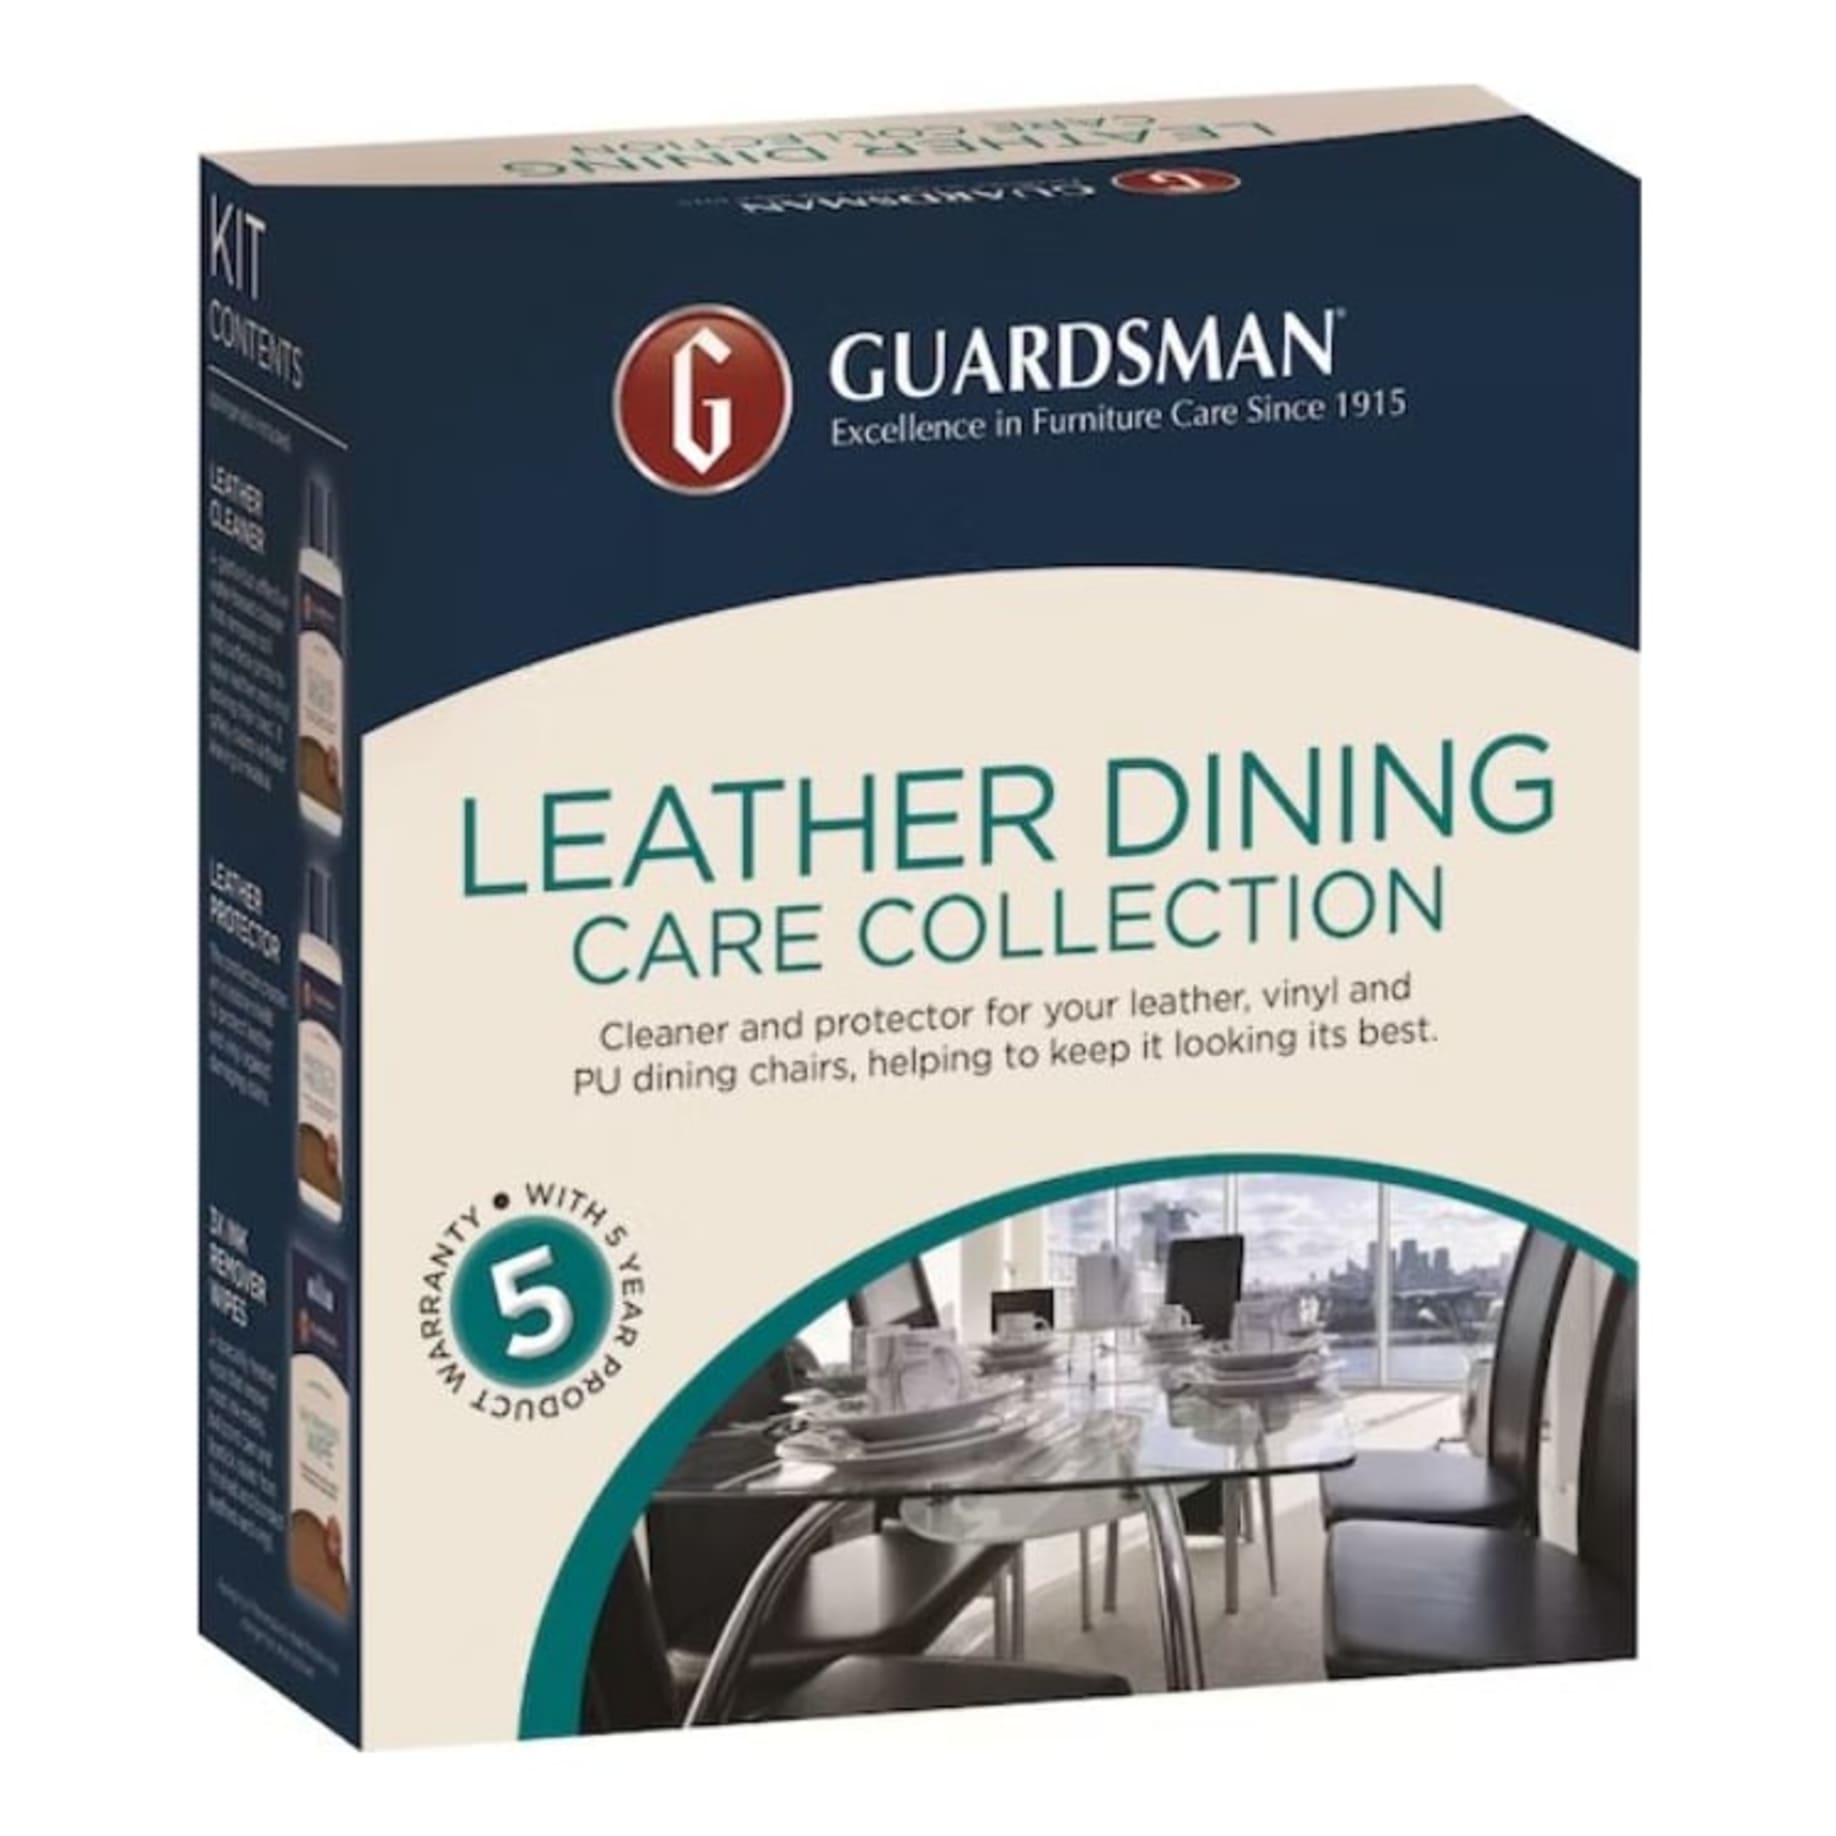 Guardsman Timber/Leather Dining Warranty